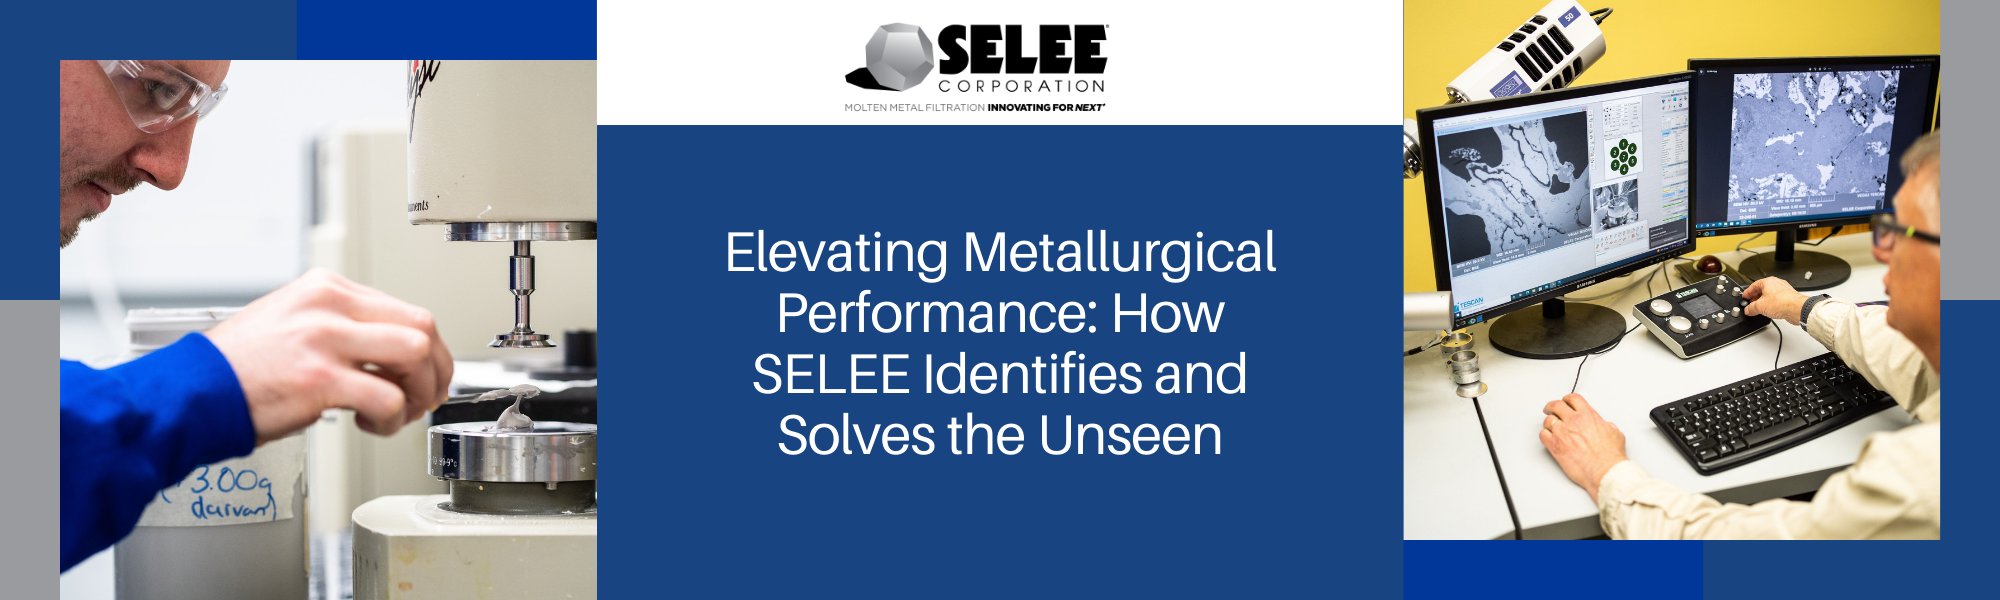 Elevating Metallurgical Performance: How SELEE Identifies and Solves the Unseen